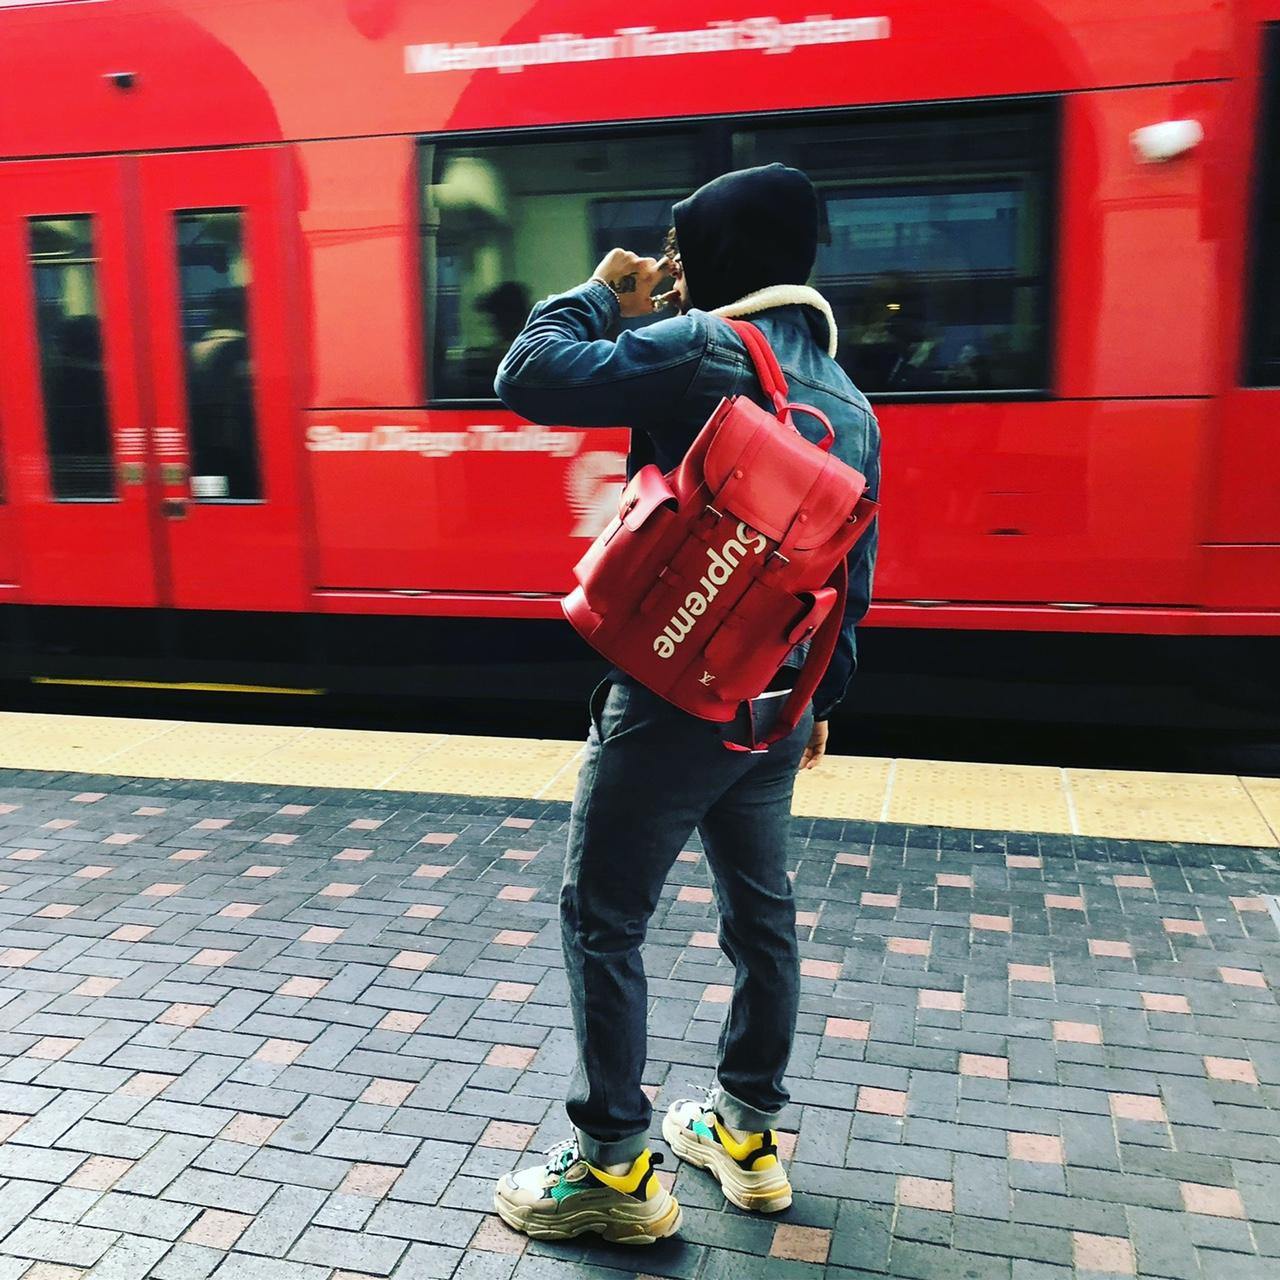 Louis Vuitton x Supreme Christopher Backpack Epi PM Red